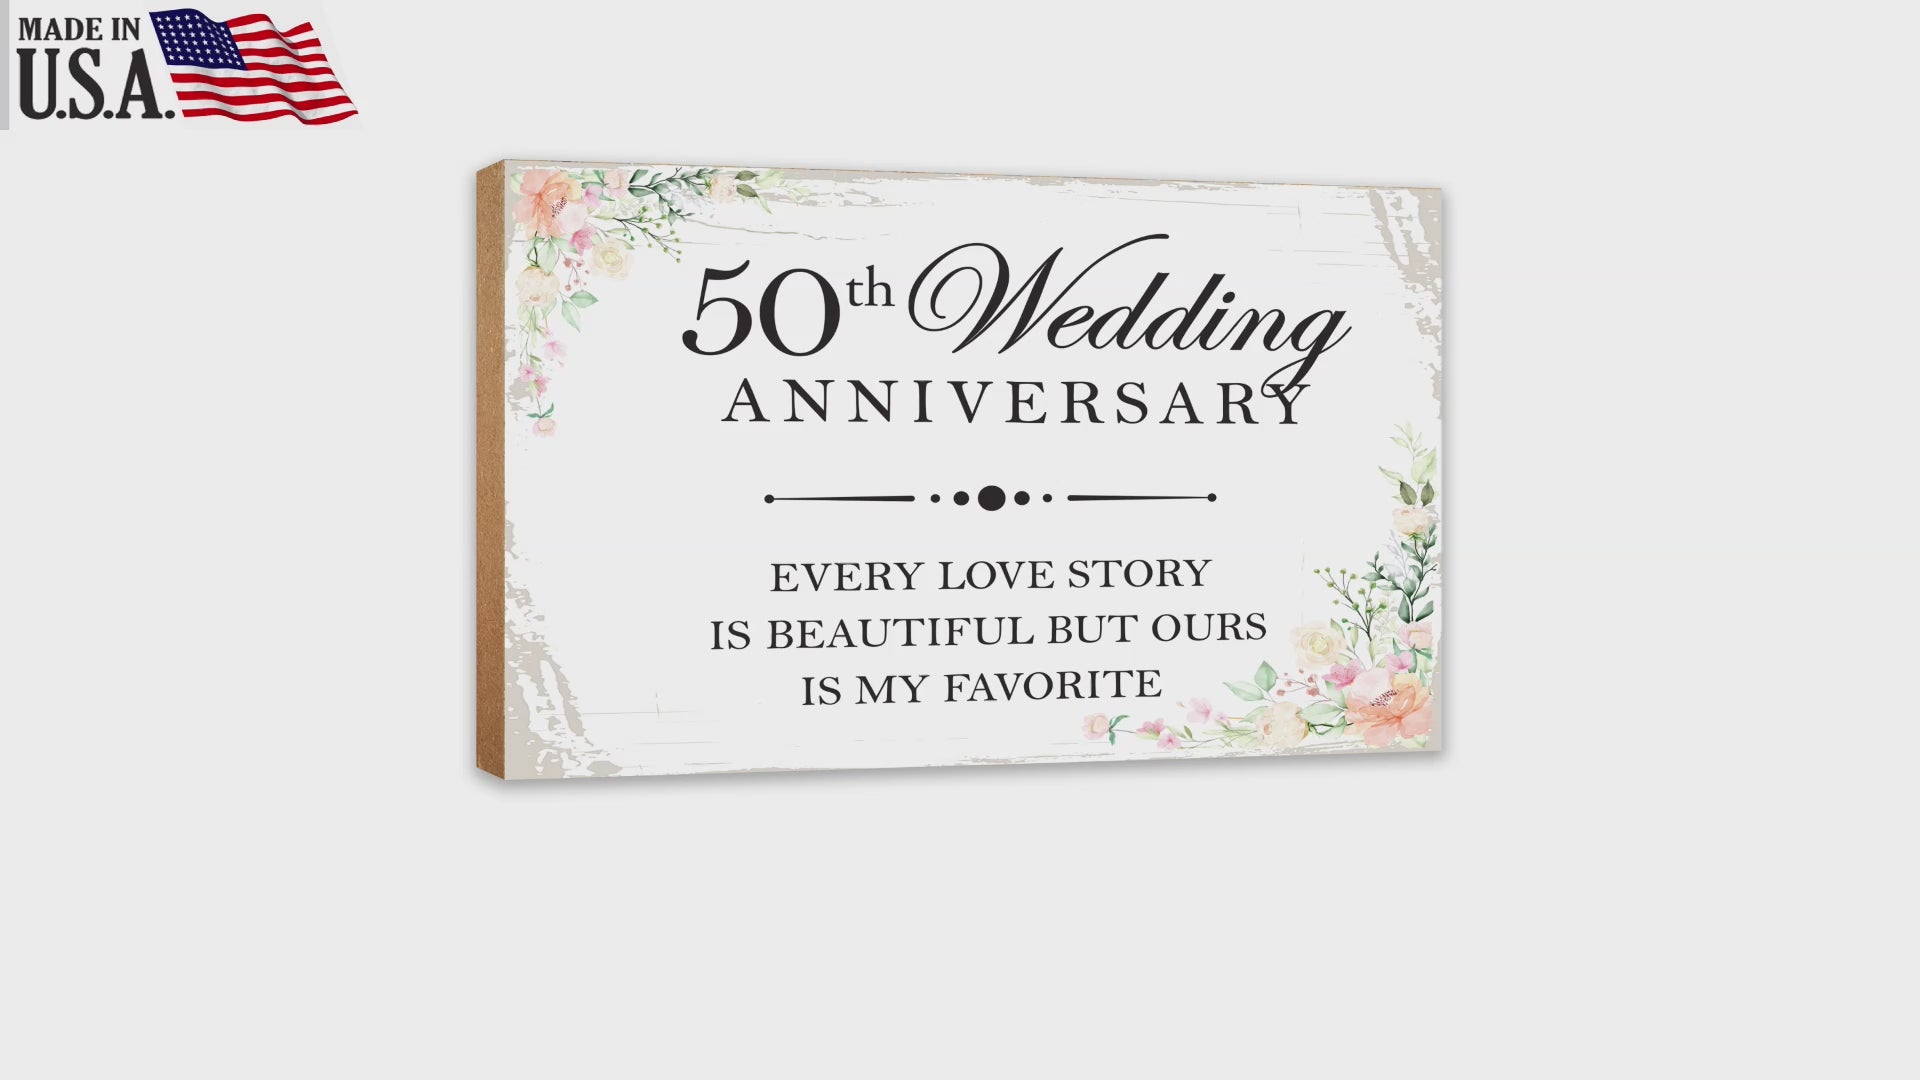 50th Wedding Anniversary Unique Shelf Decor and Tabletop Signs Gifts for Couples - Every Love Story